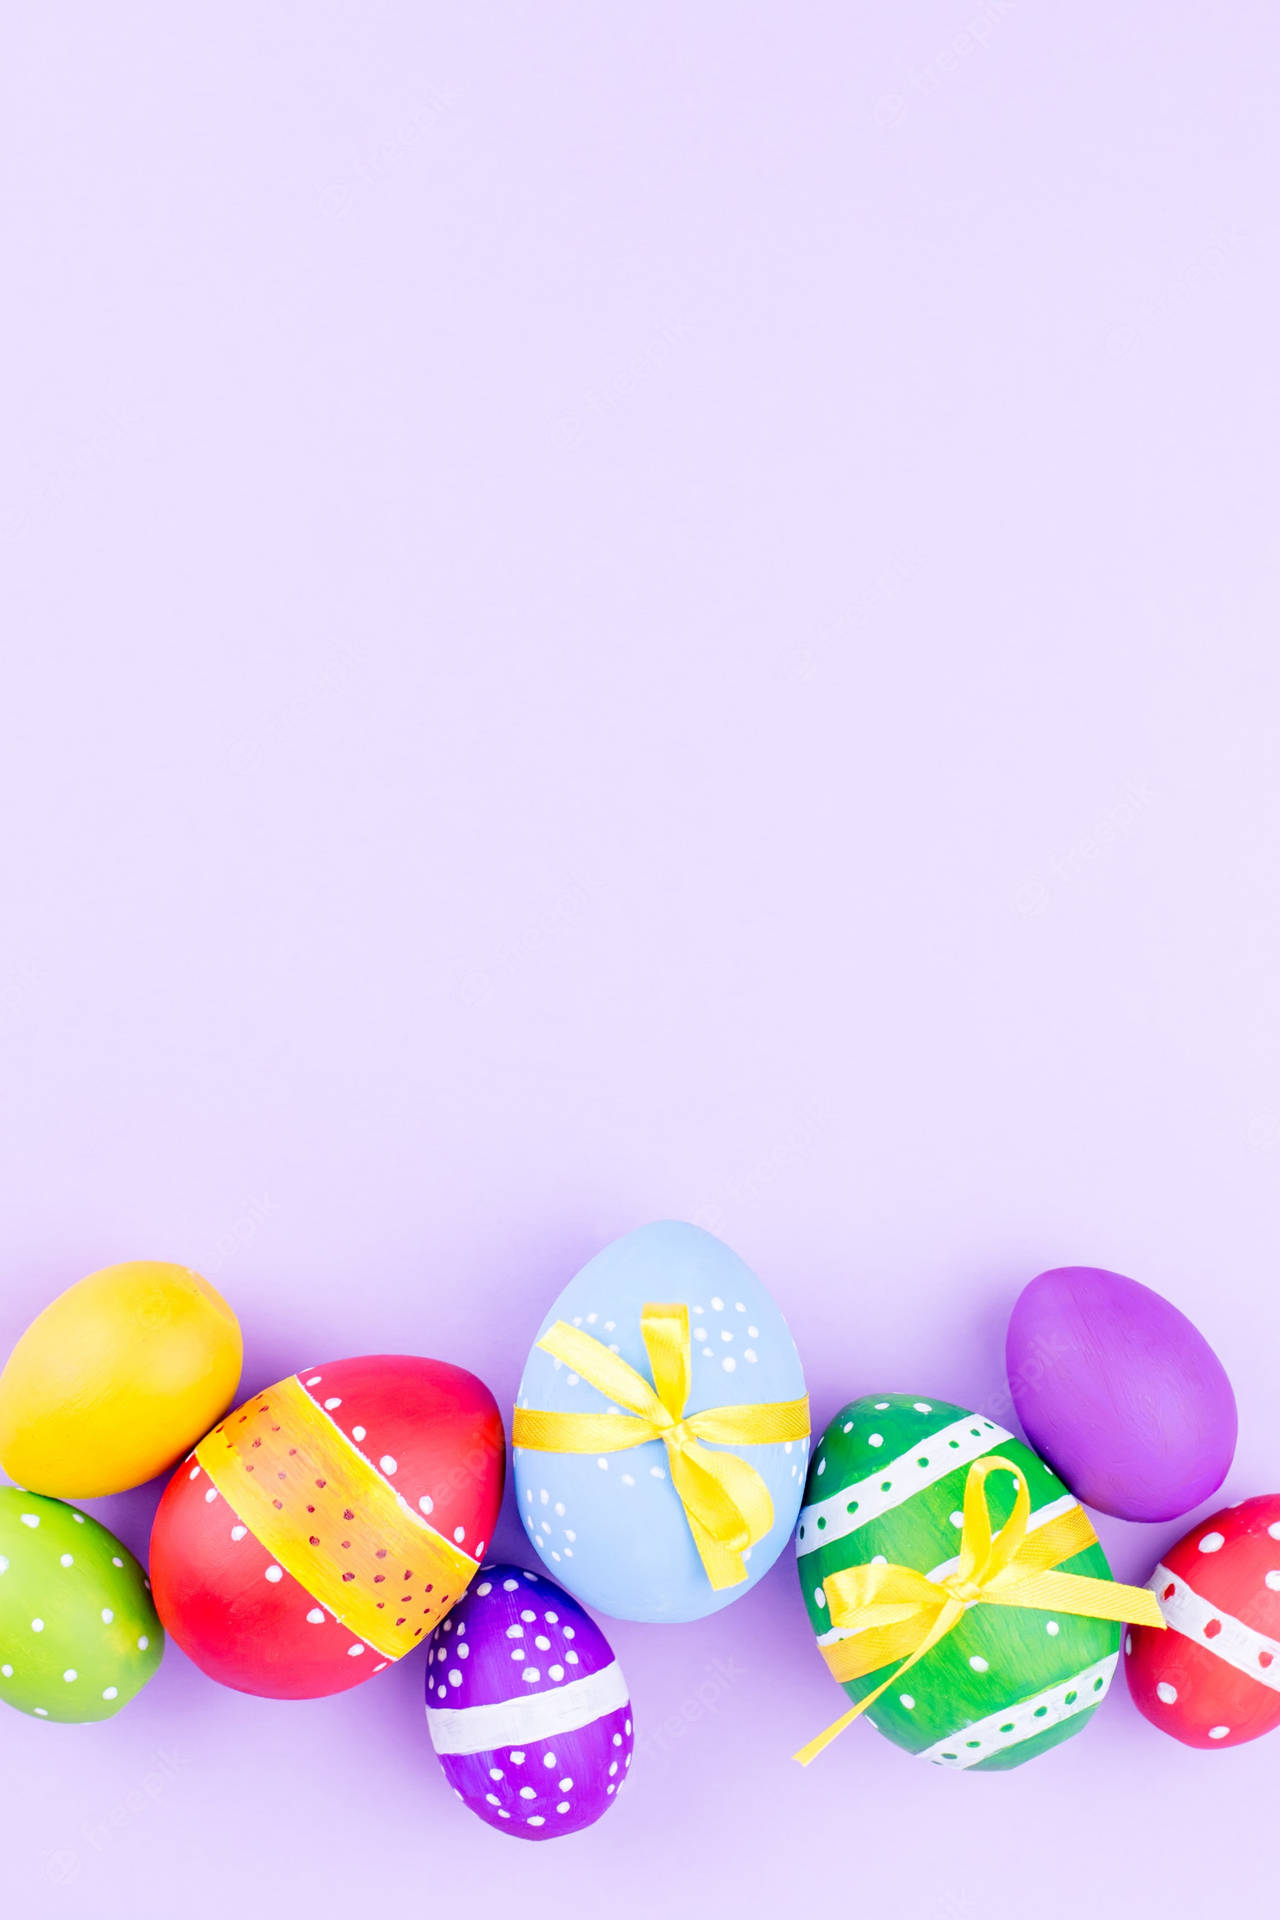 Celebrate the spring season with Easter Phone! Wallpaper